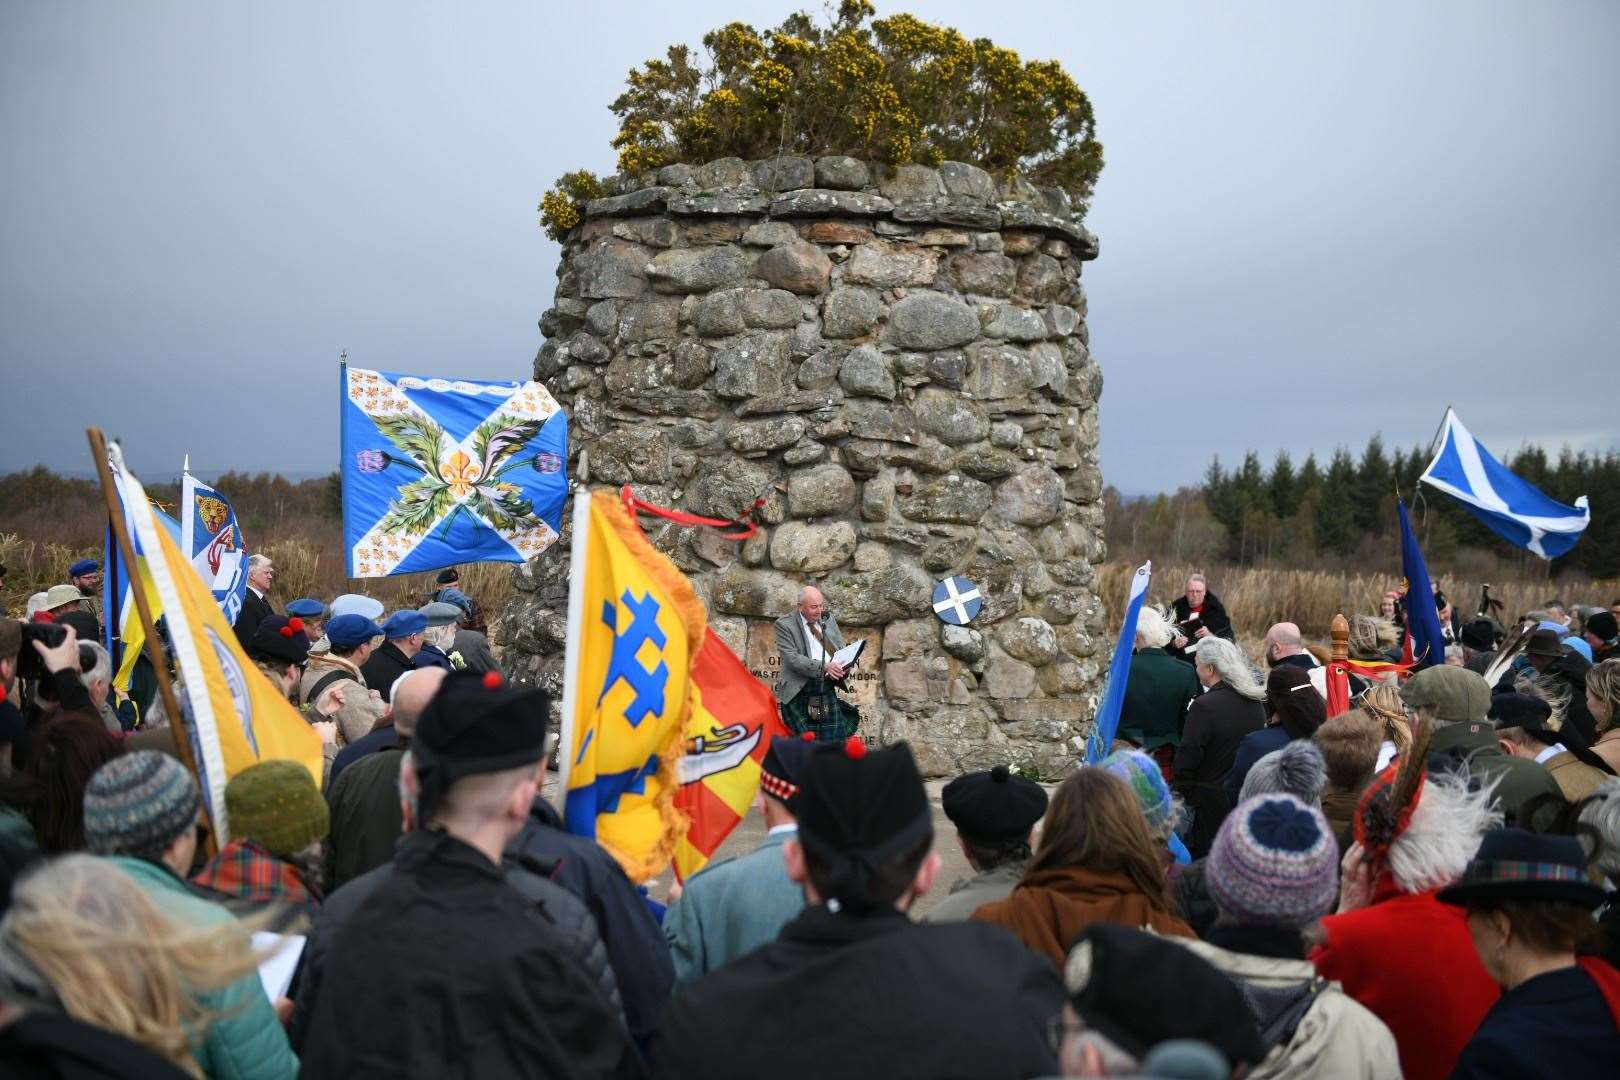 The service took place at the cairn at Culloden Battlefield.